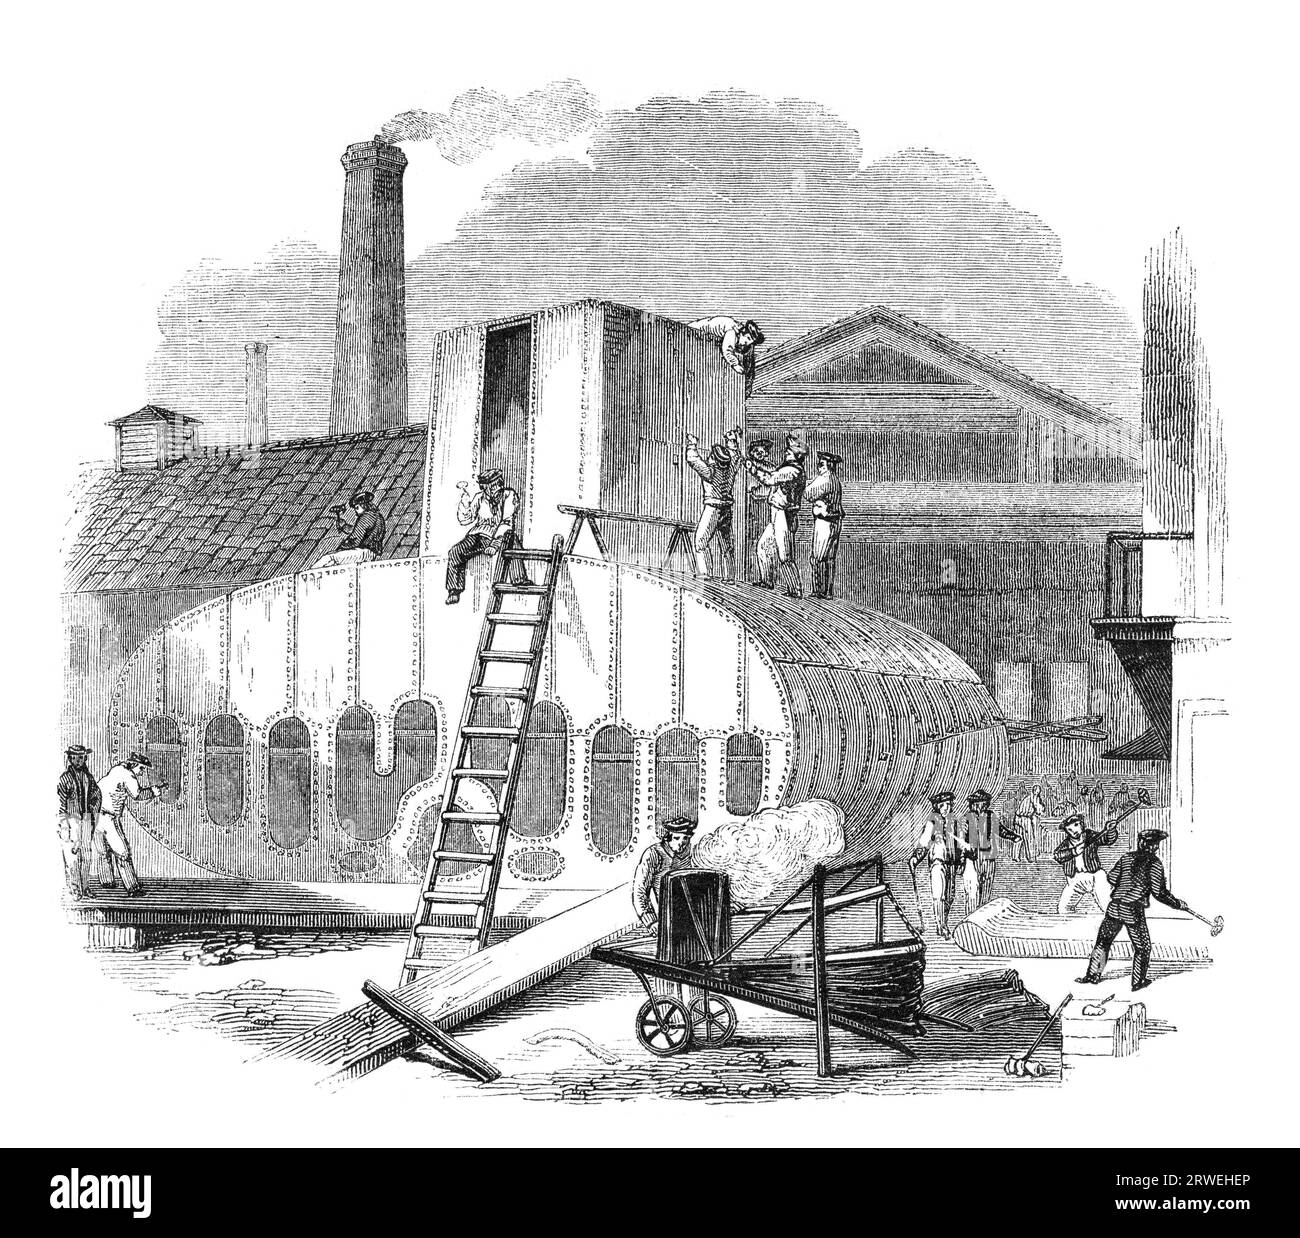 A Day at the Clyde Steam-boat works: Steam-boiler Making, Vulcan foundry. Engraving from a british magazine printed in 1843 Stock Photo